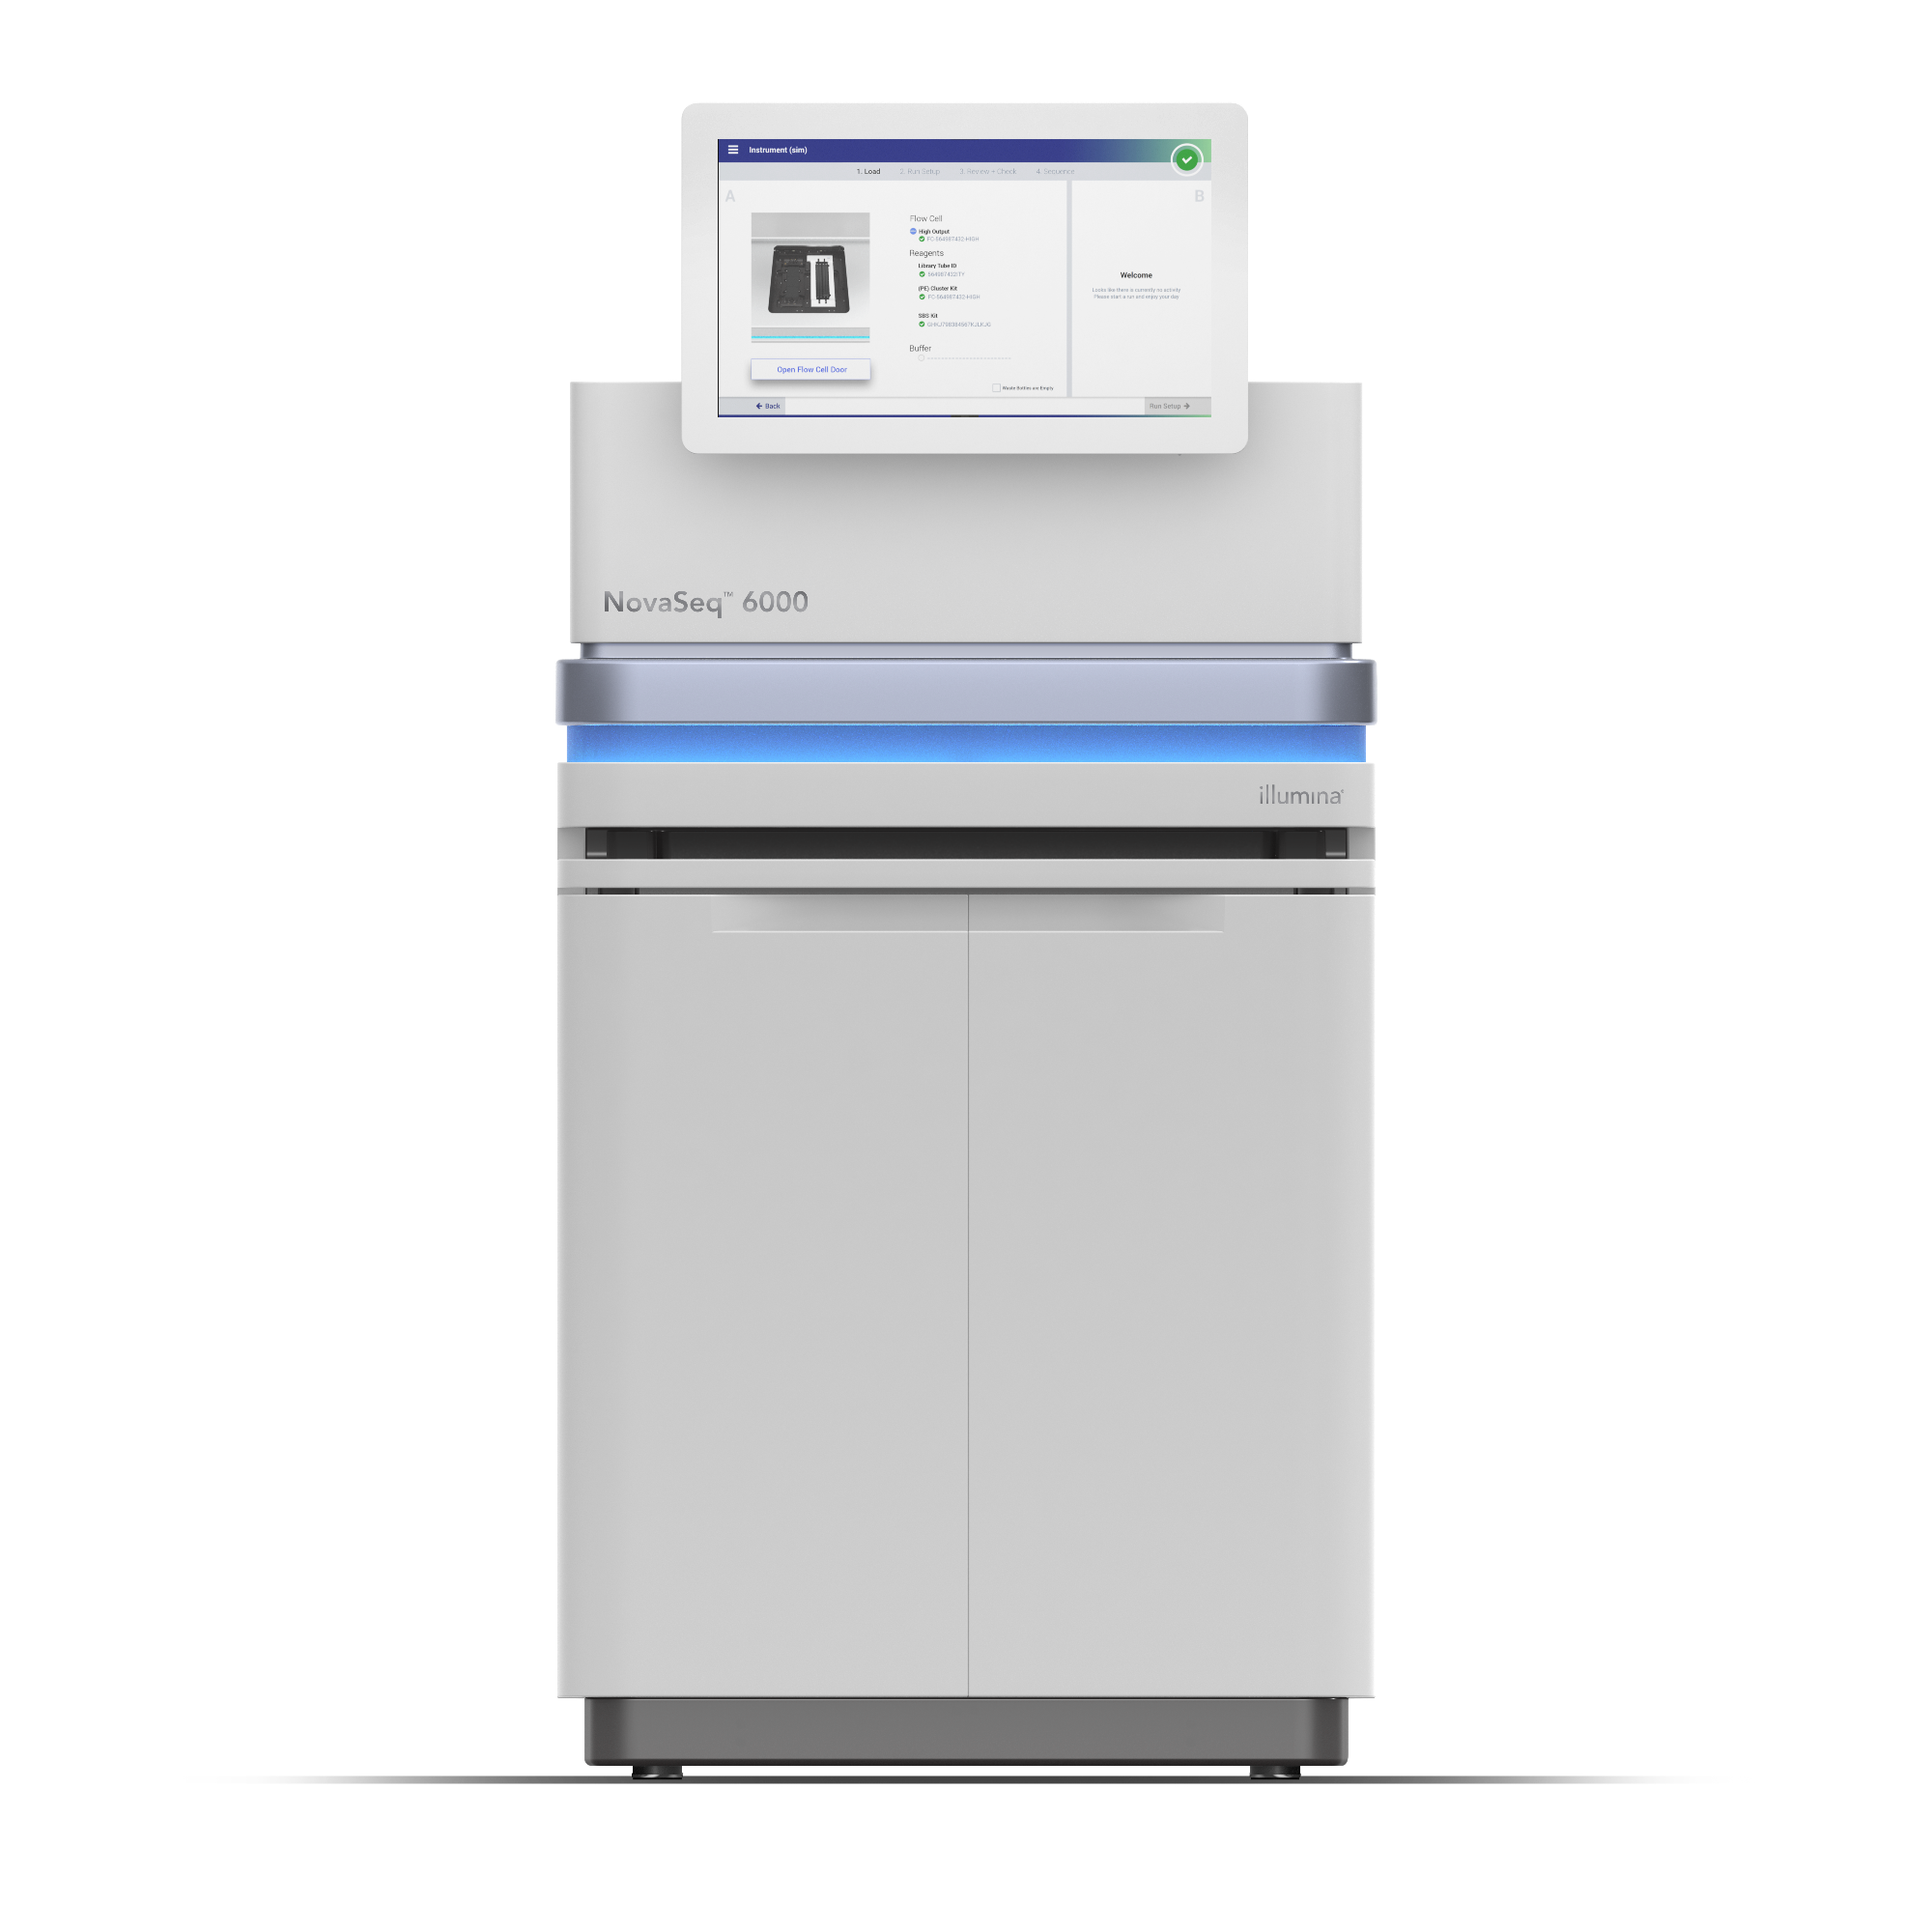 NovaSeq 6000 Sequencing System